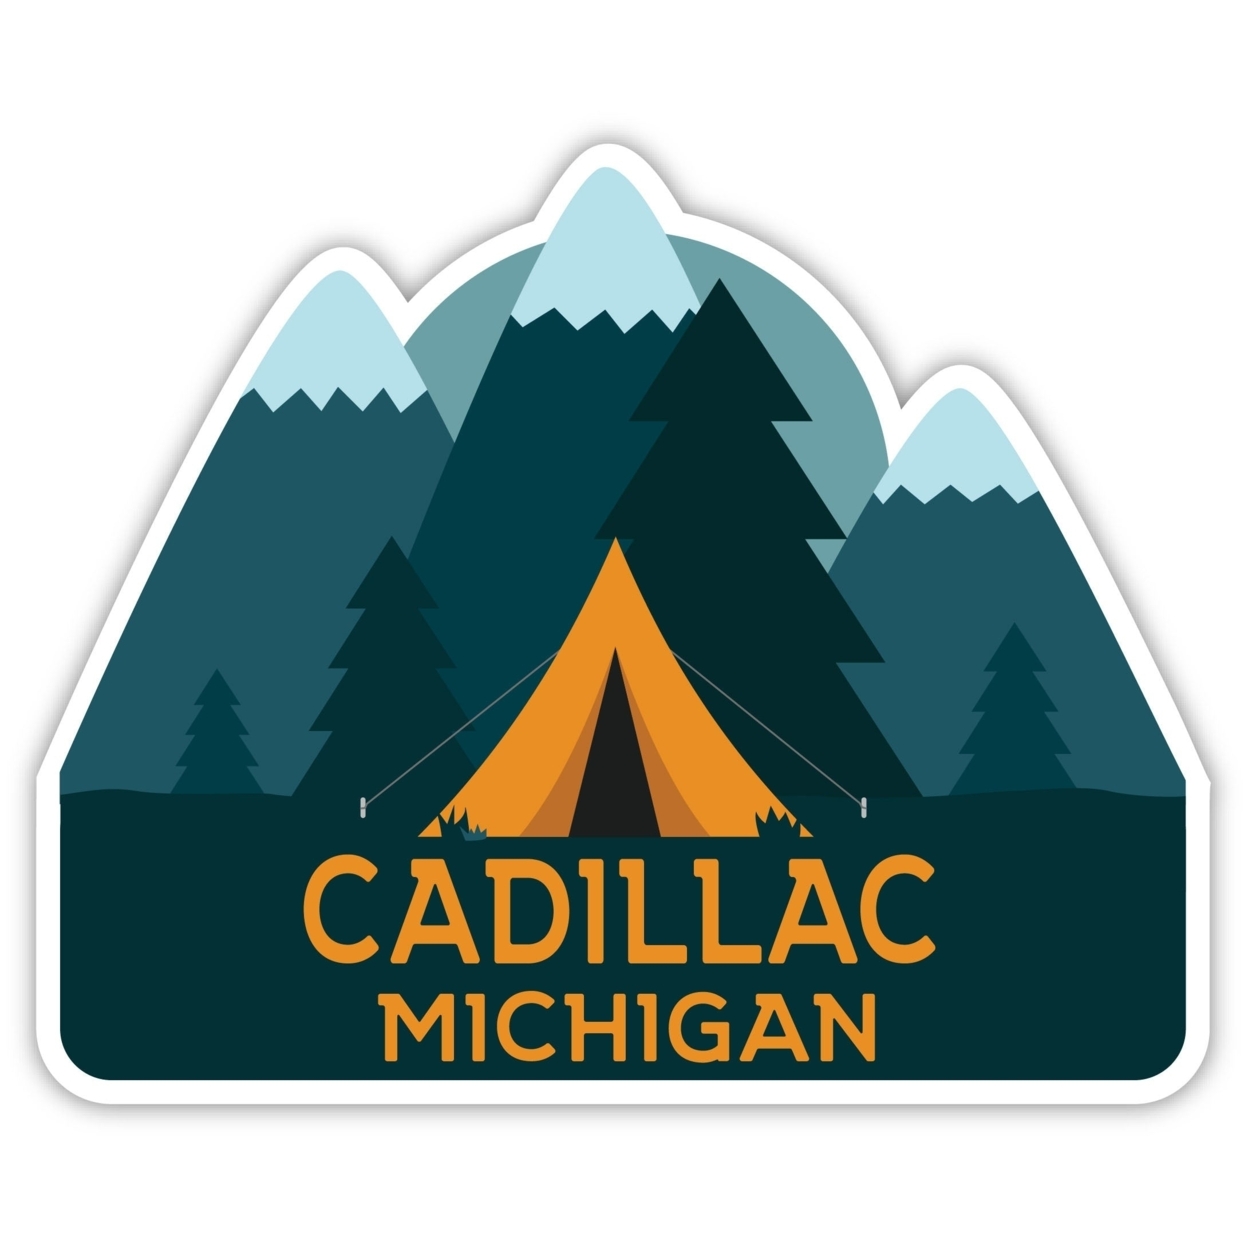 Cadillac Michigan Souvenir Decorative Stickers (Choose Theme And Size) - 4-Pack, 12-Inch, Tent